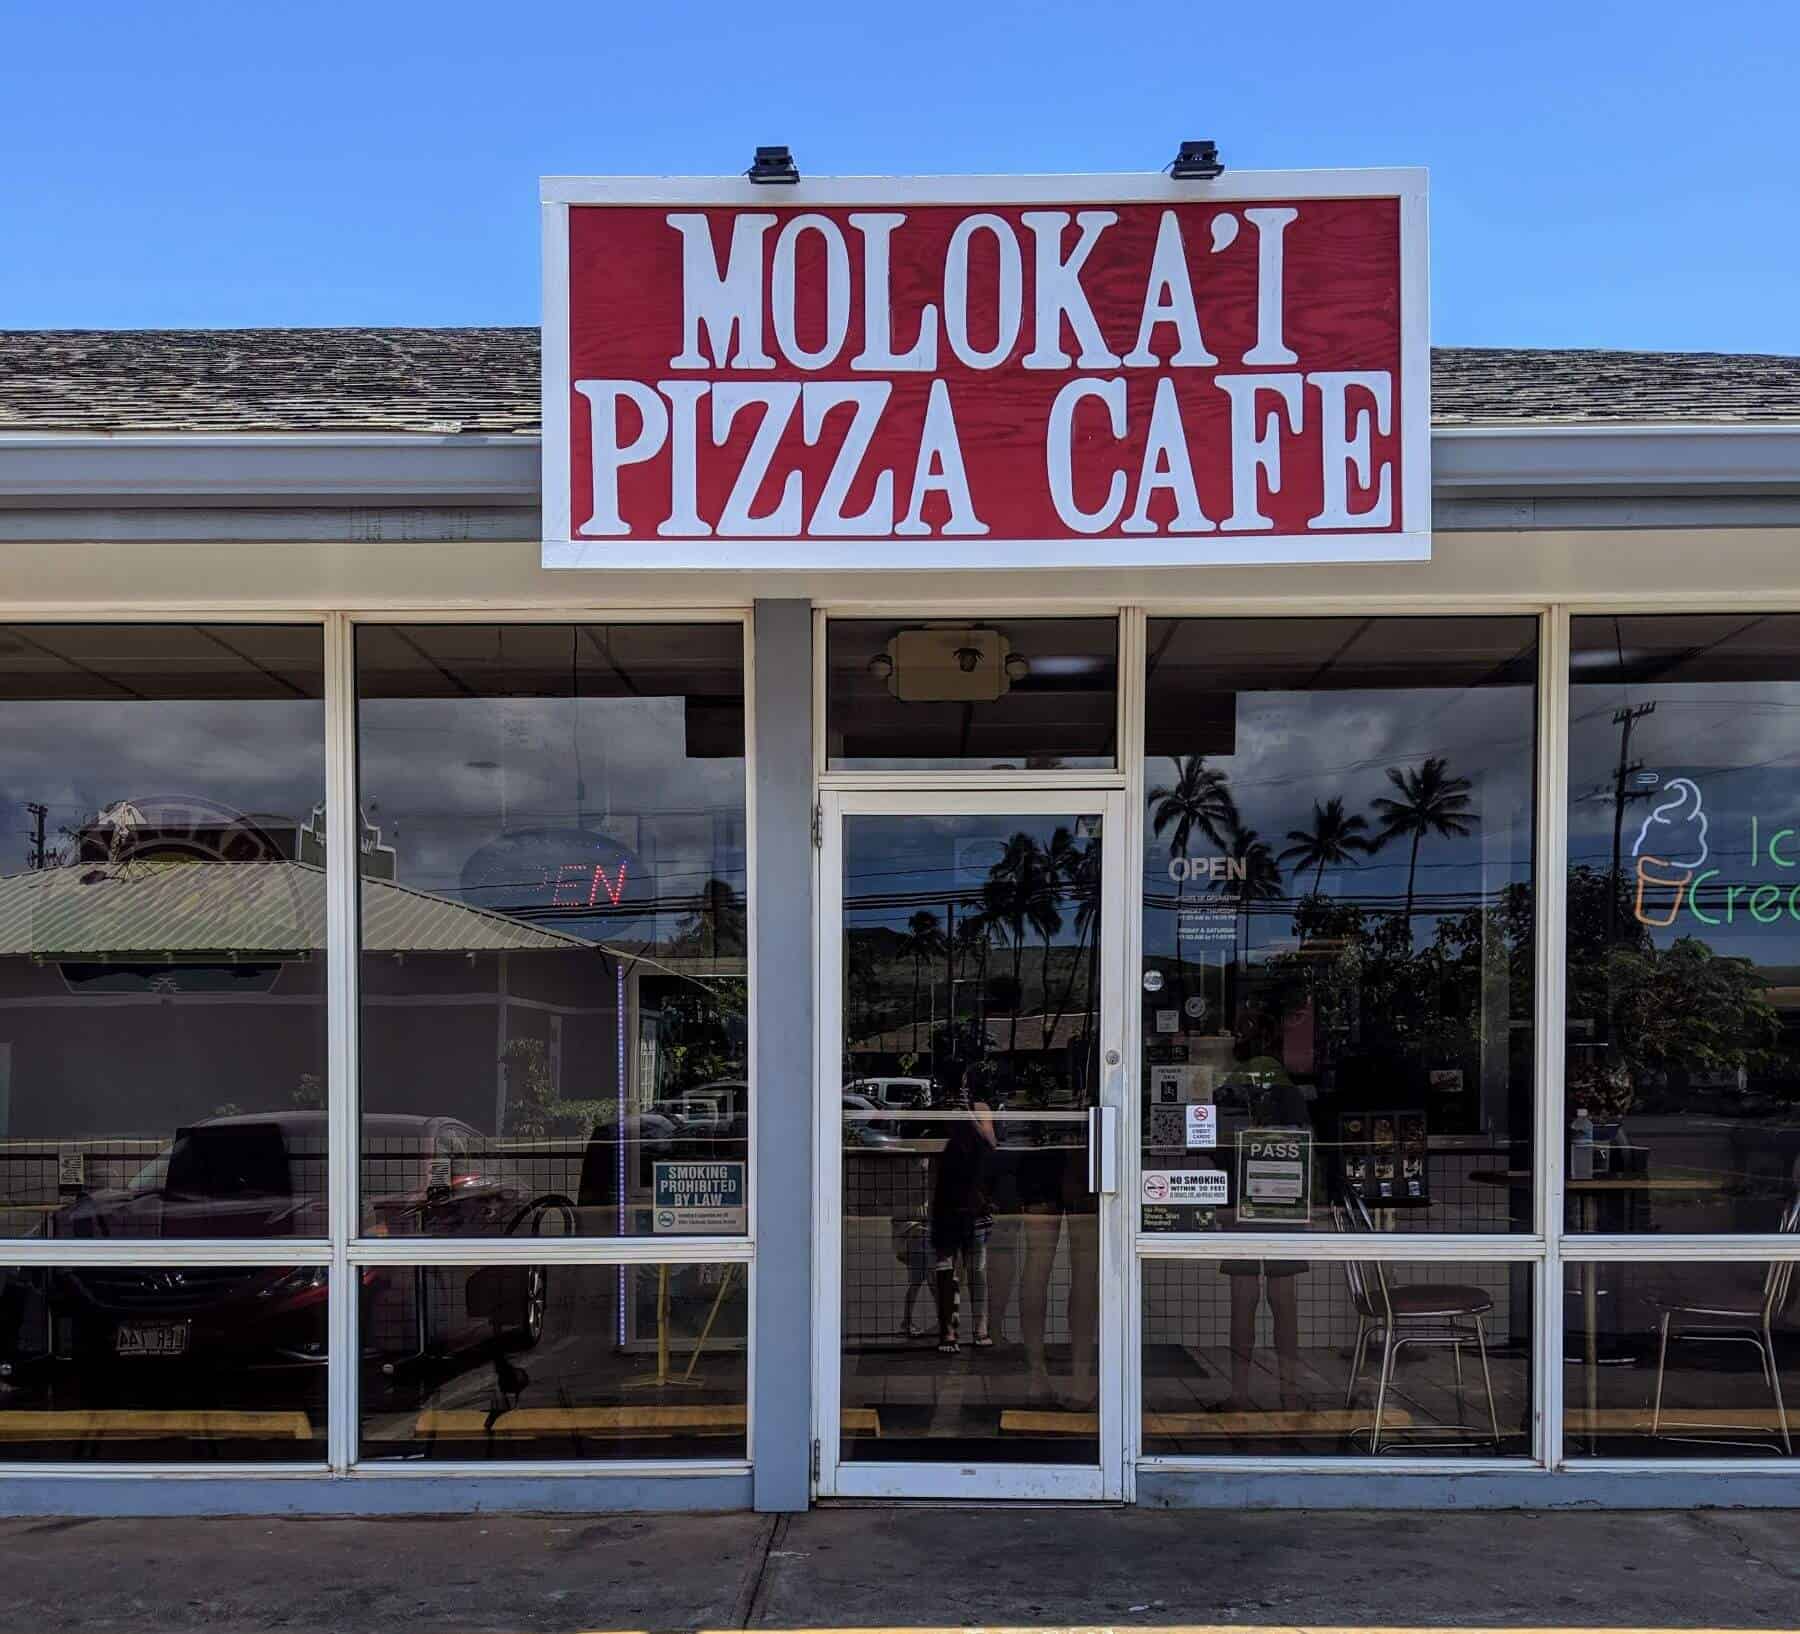 Molokai Pizza Café sign in front of glass building